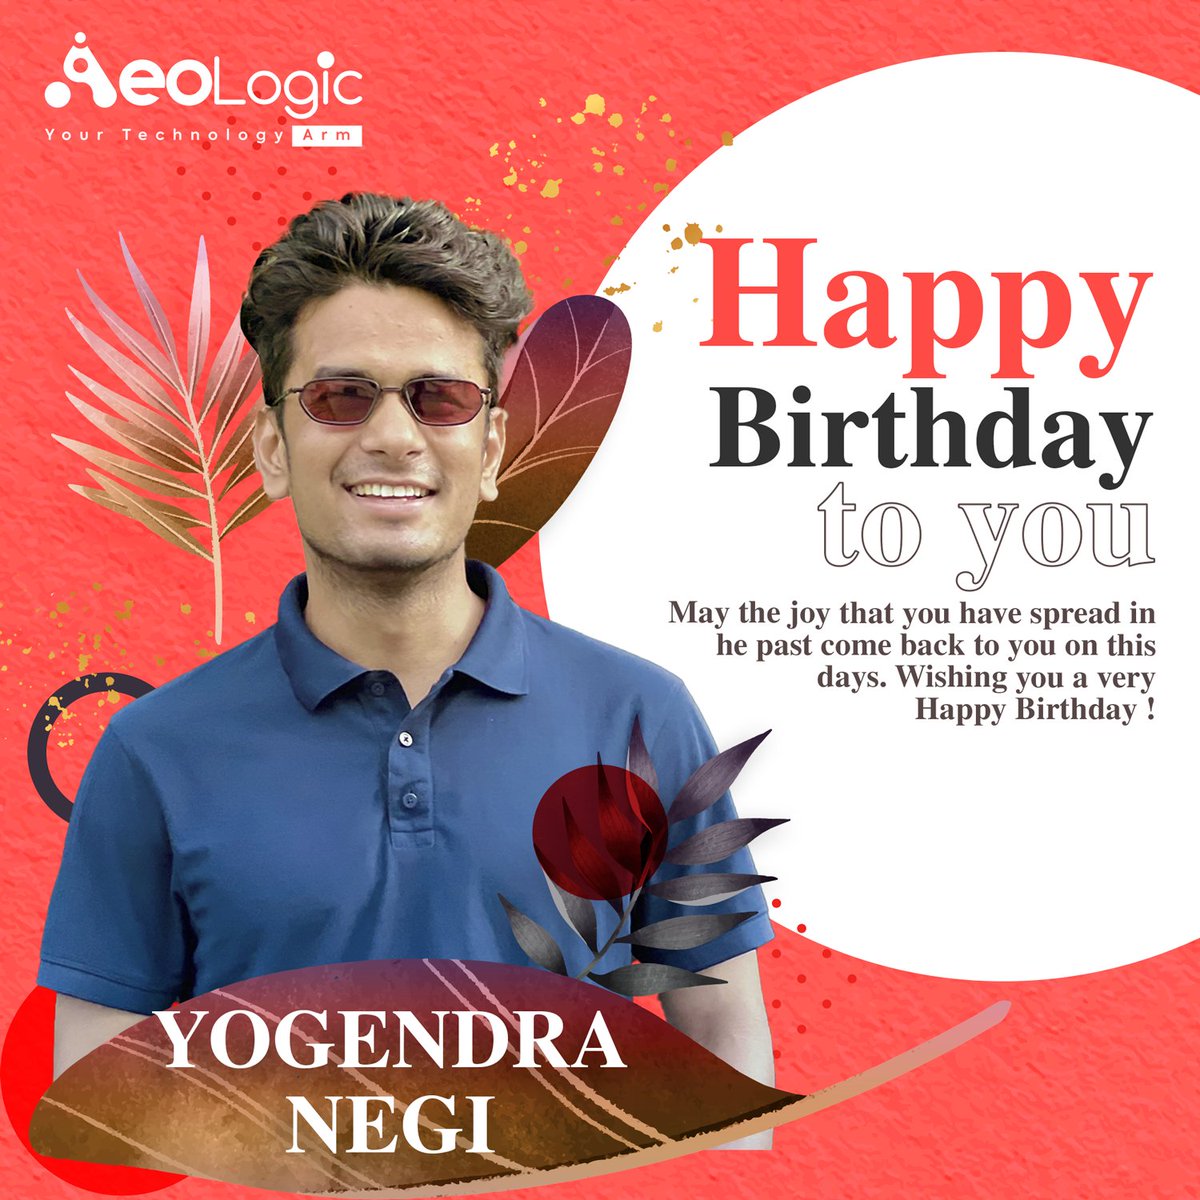 Happy Birthday, Yogendra Negi! 🎂  

Today, we at Aeologic Technologies celebrate not just a team member, but a powerhouse of innovation and dedication!  

Your contributions drive us forward, and your enthusiasm inspires us every day.  

#HappyBirthday #InnovationLeaders